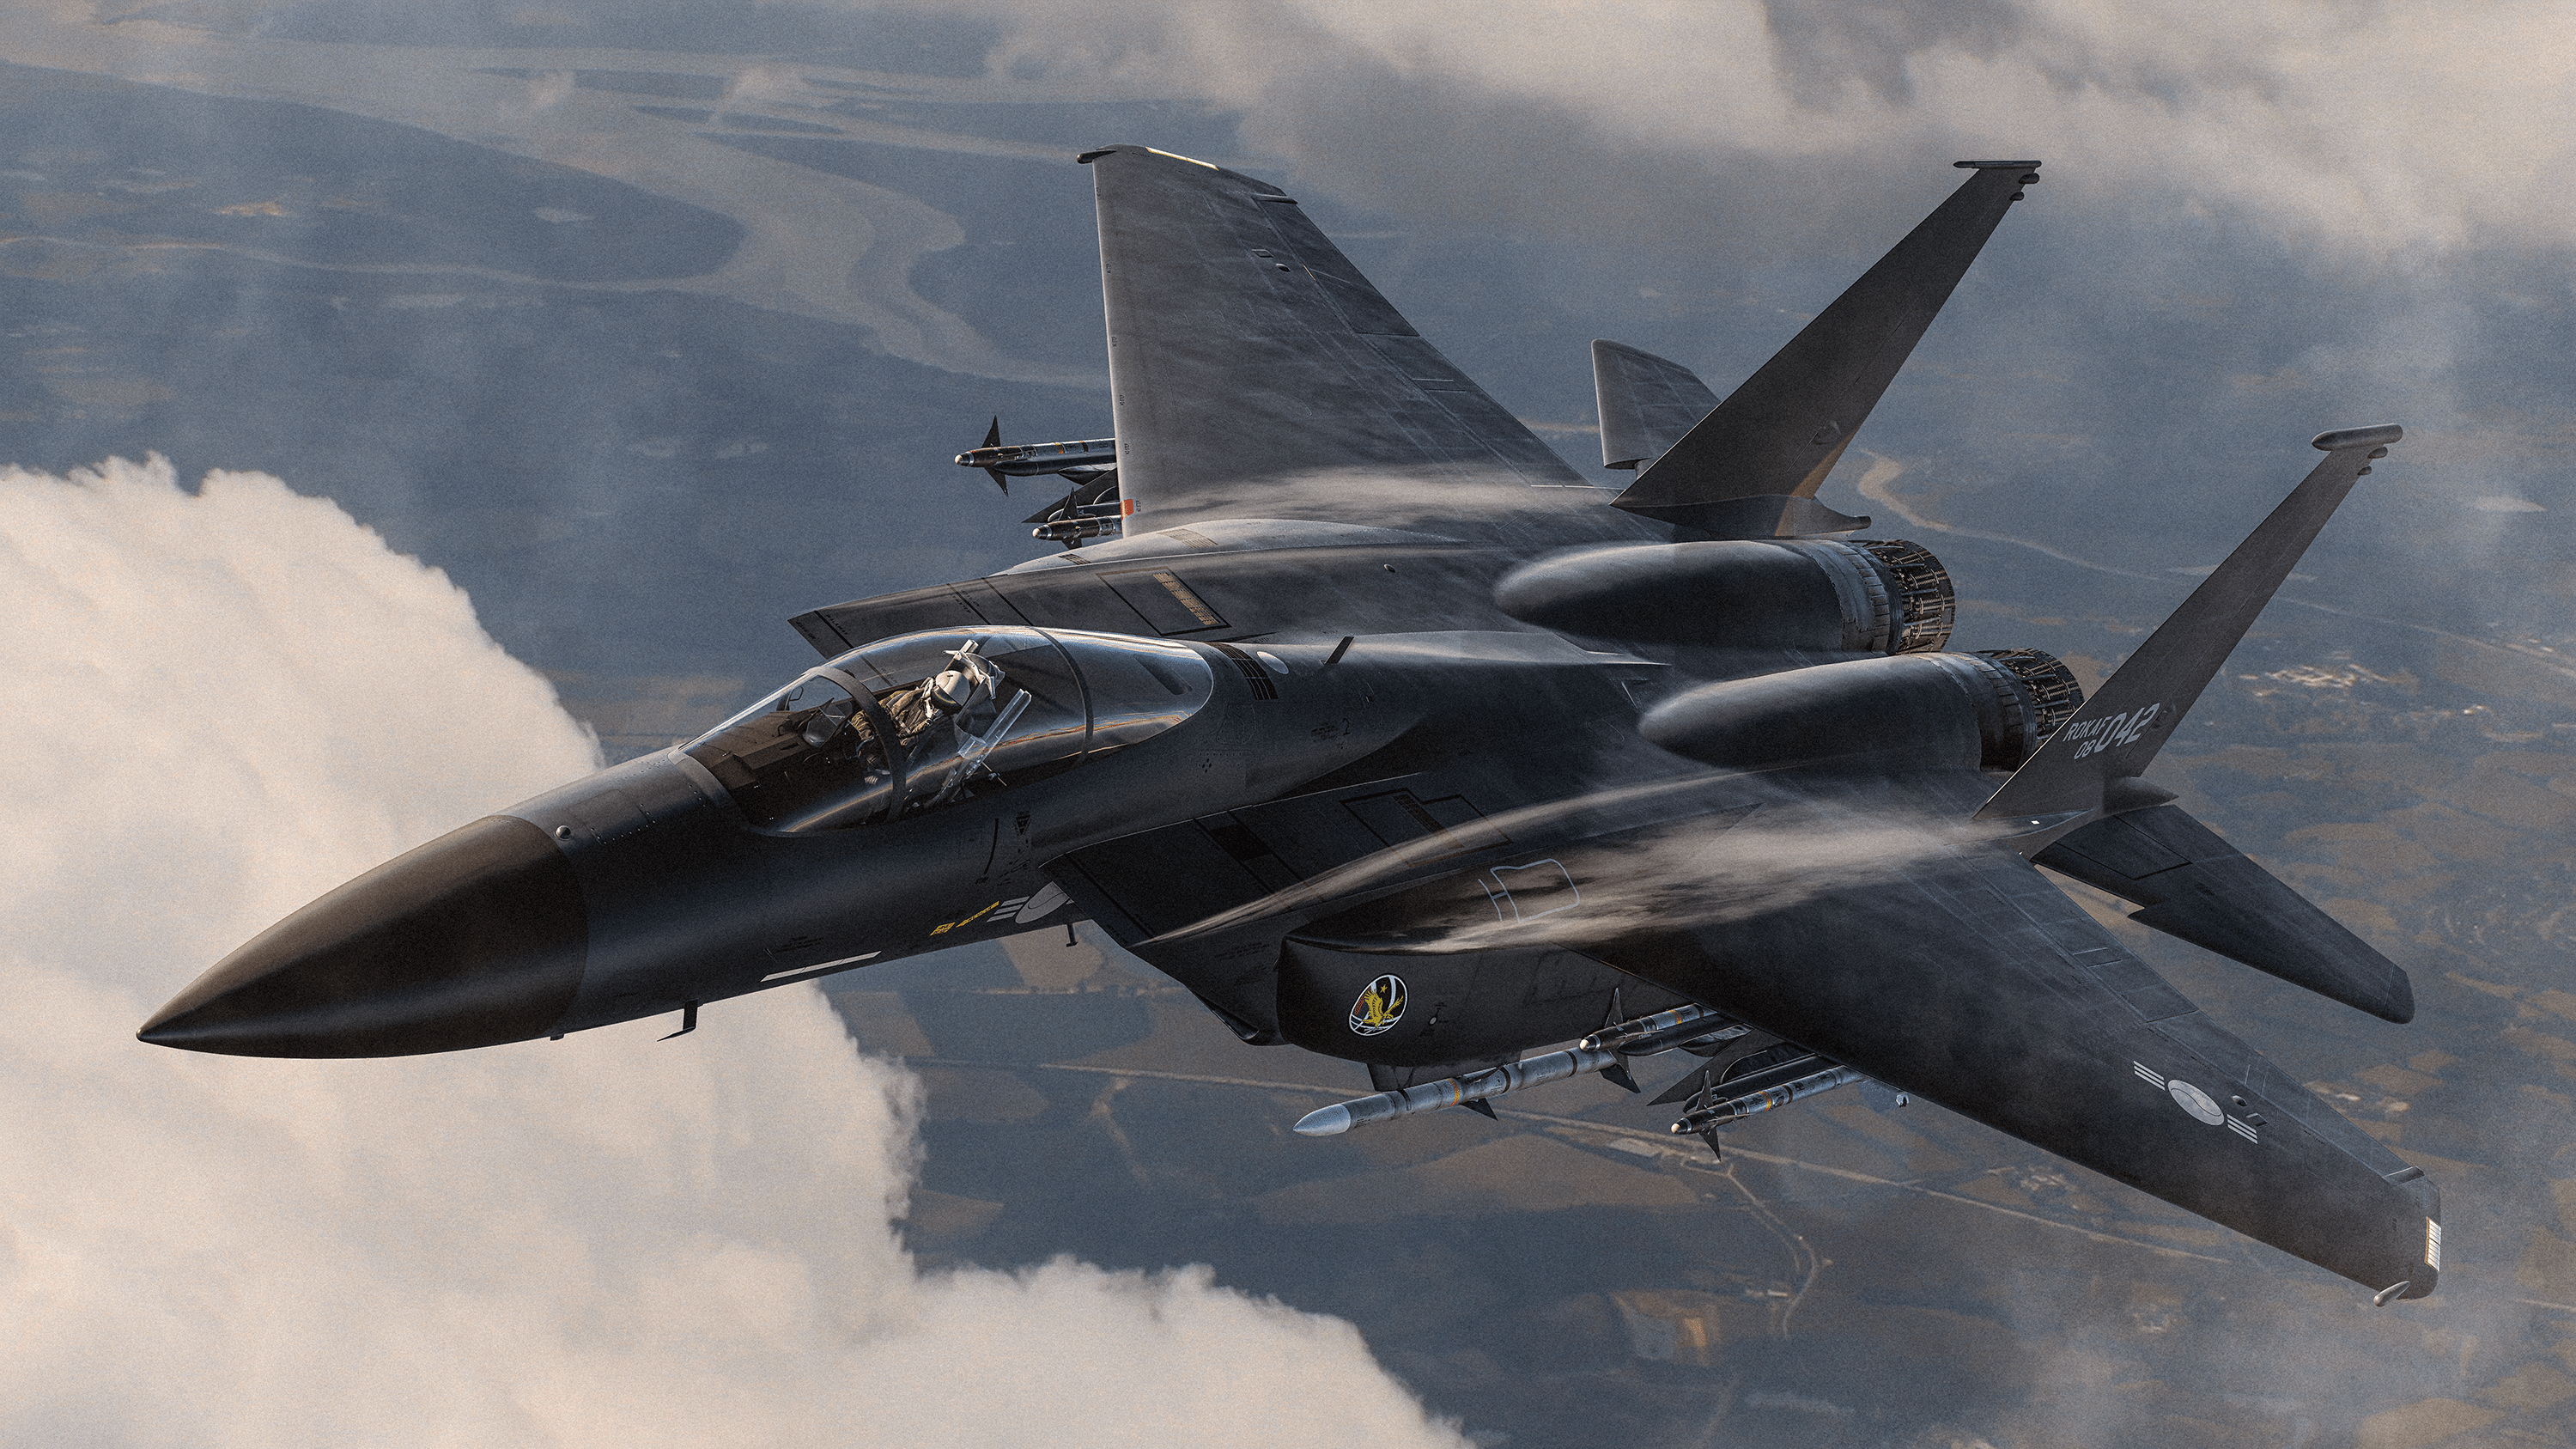 General 3000x1687 jet fighter aircraft military aircraft F-15 Eagle combat aircraft American aircraft McDonnell Douglas ROK Air Force